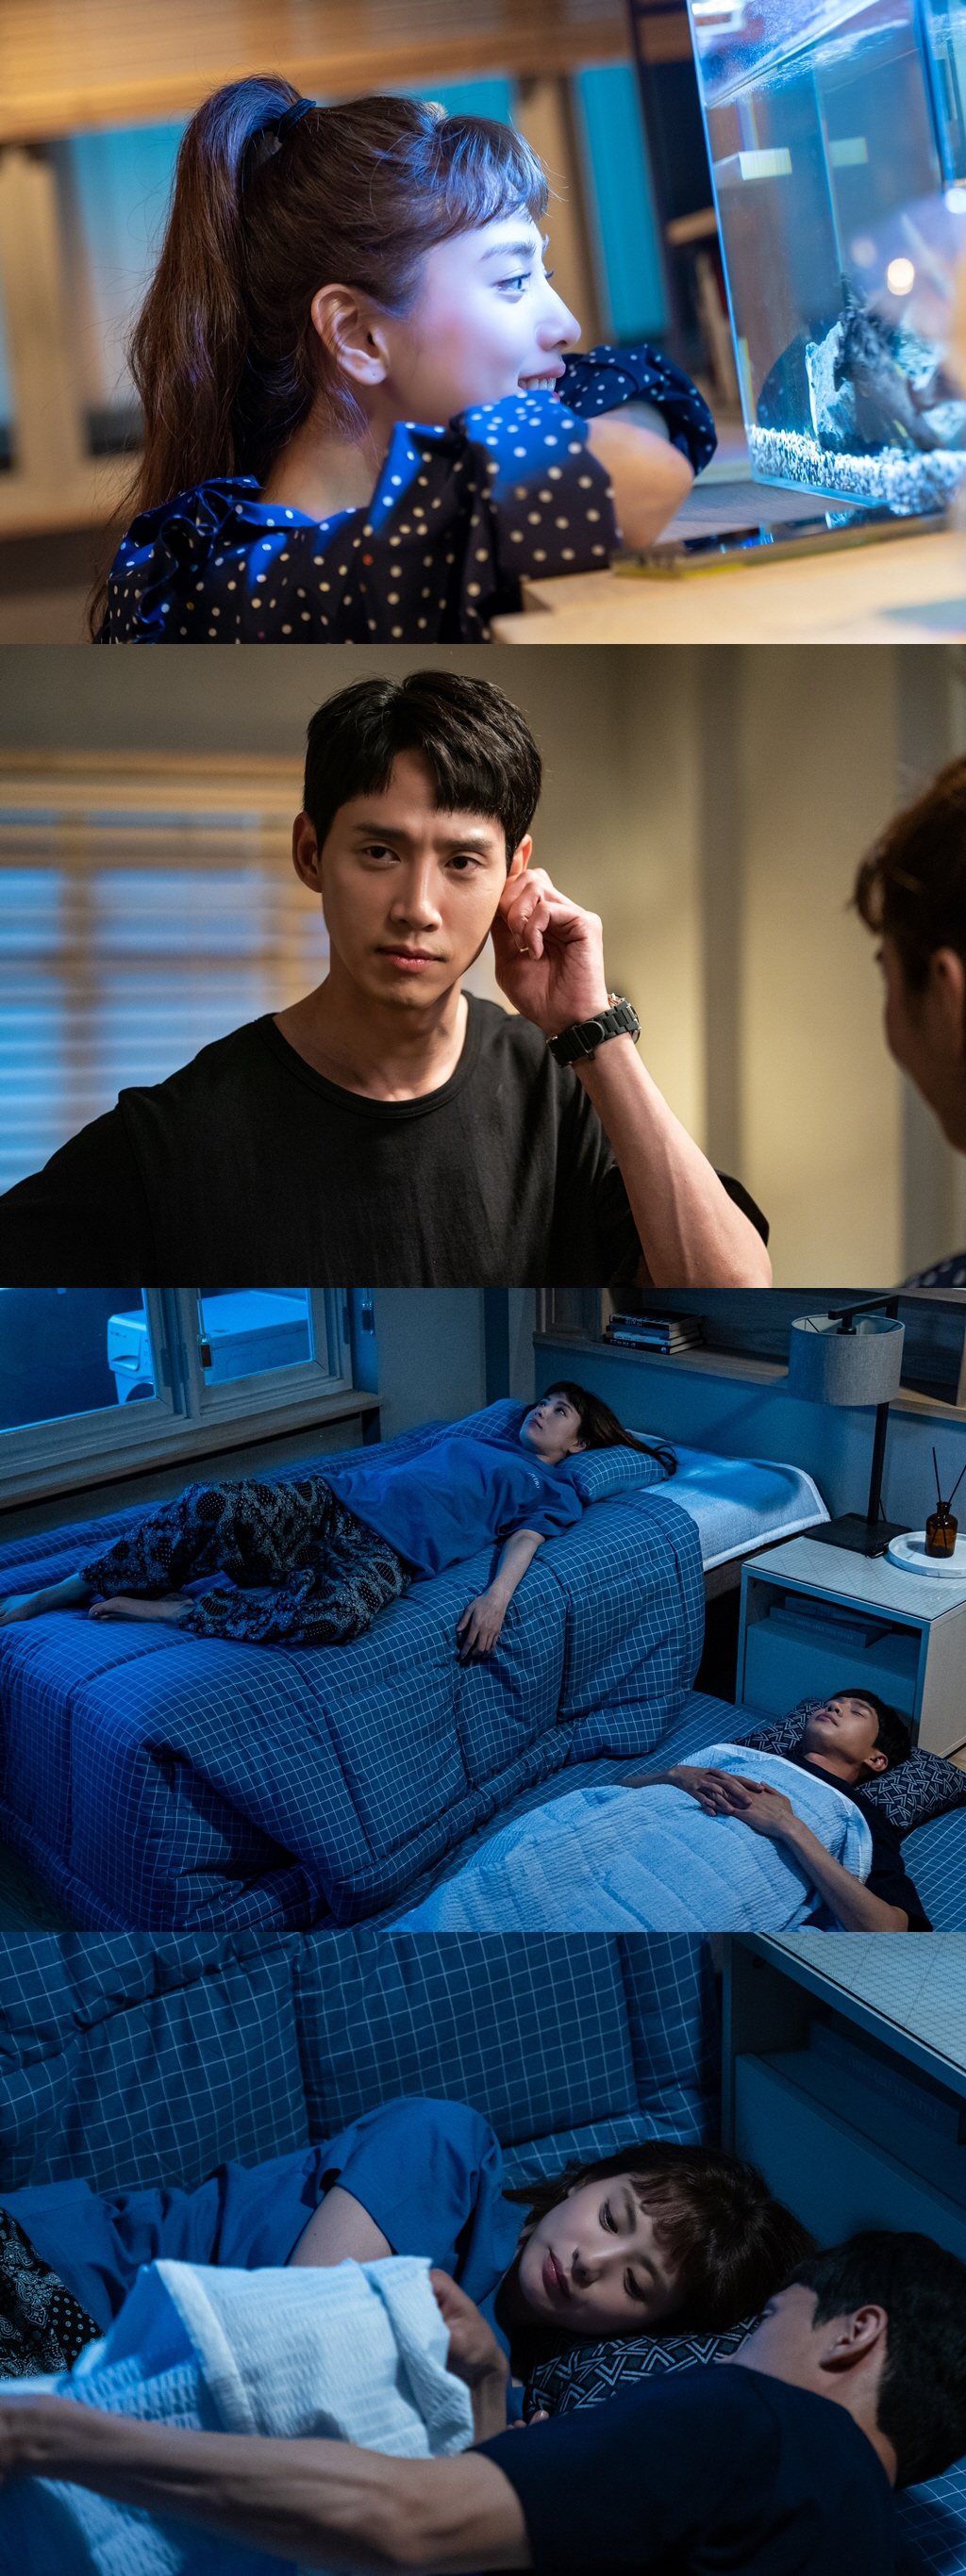 A houselift was foreseen by Chu Shi Biao Nana and Park Sung-hoon.KBS 2TV Wednesday-Thursday Evening drama Chu Shi Biao (hereinafter referred to as Chu Shi Biao) is captivating the house theater with the romance of Alcondal Kong by former Sarah (Nana) and Seo Gong-myeong (Park Sung-hoon).It is revealed that the two people who are tit-for-tat are sharing sad memories during elementary school days, and their love feels more sad.Viewers who love the old Sarah and the so-called Lacom Couple poured a hot response to the 13th announcement that was released immediately after the 12th Chu Shi Biao ending.Sarah, who was worried about the name of the sky in the 13th preview, visited the house of the sky in the late night.Then, the two people who sat face to face, ate rice, lay side by side, hugged each other, and fell asleep made the viewer feel excited and heartbeat.Meanwhile, on August 12, the production team of Chu Shi Biao is concentrating attention on the scene of the house of Sarah and Seogongmyeong, which was slightly released in the preliminary broadcast ahead of the 13th broadcast.In the open photo, Sarah is squatting in front of a fishing port where a familyless servant is alone, soothing loneliness.The searcher seems a little embarrassed by the old Sarah, who came home late at night suddenly.In the next photo, you can see the bed of the old Sarah, Sarah, lying on the bed of the old man in the clothes of the old man, and the sleeping of the old man on the floor.After returning a long way but confirming their hearts toward each other, the two began a poor but lovely love affair.Although they kept secrets thoroughly, two people who were so in love with each other that they were found out in friends and family as well as in the Mawon-gu council were taken care of.I am already excited about what romance scenes will be poured out and how much the chemistry of the Lacom couple will shine.At the same time, it is noteworthy how the old man who is worried about him, who faces the sad past, will feel each others pain.In response, Chu Shi Biao production team said, Today (12th) Sarah and Seogongmyeong will make a surprise house.I would like to ask for your interest and expectation in the love of two people who are getting hotter when they laugh. The 13th episode of Chu Shi Biao will be broadcast today (12th) at 9:30 pm on Wednesday night, without the job of KBS 2TV Wednesday-Thursday evening drama to be released.